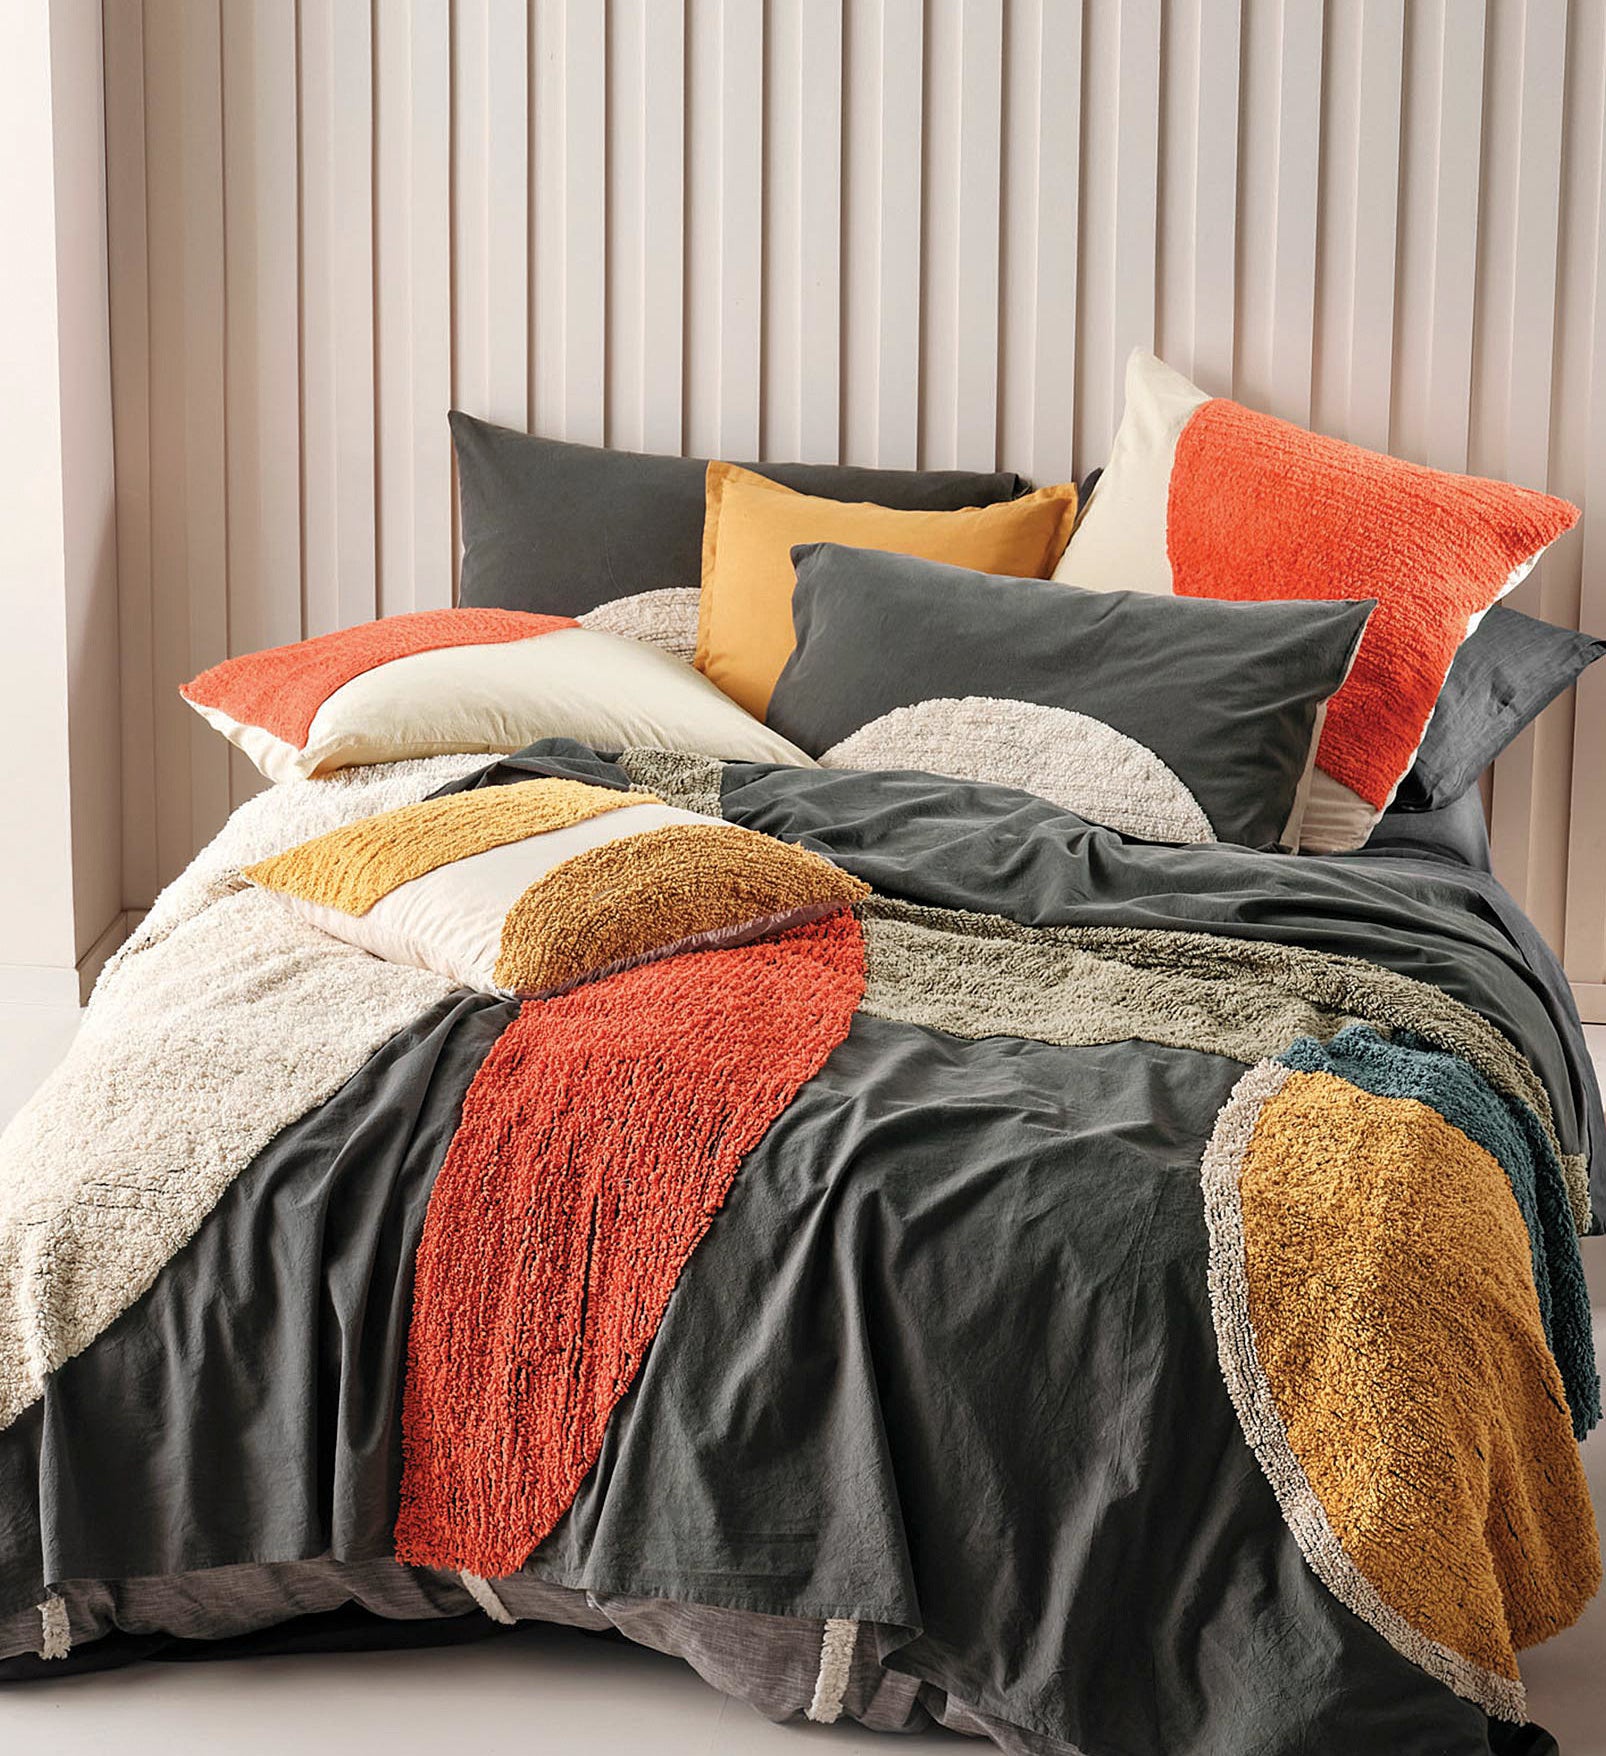 a textured duvet cover set on a comfy bed 